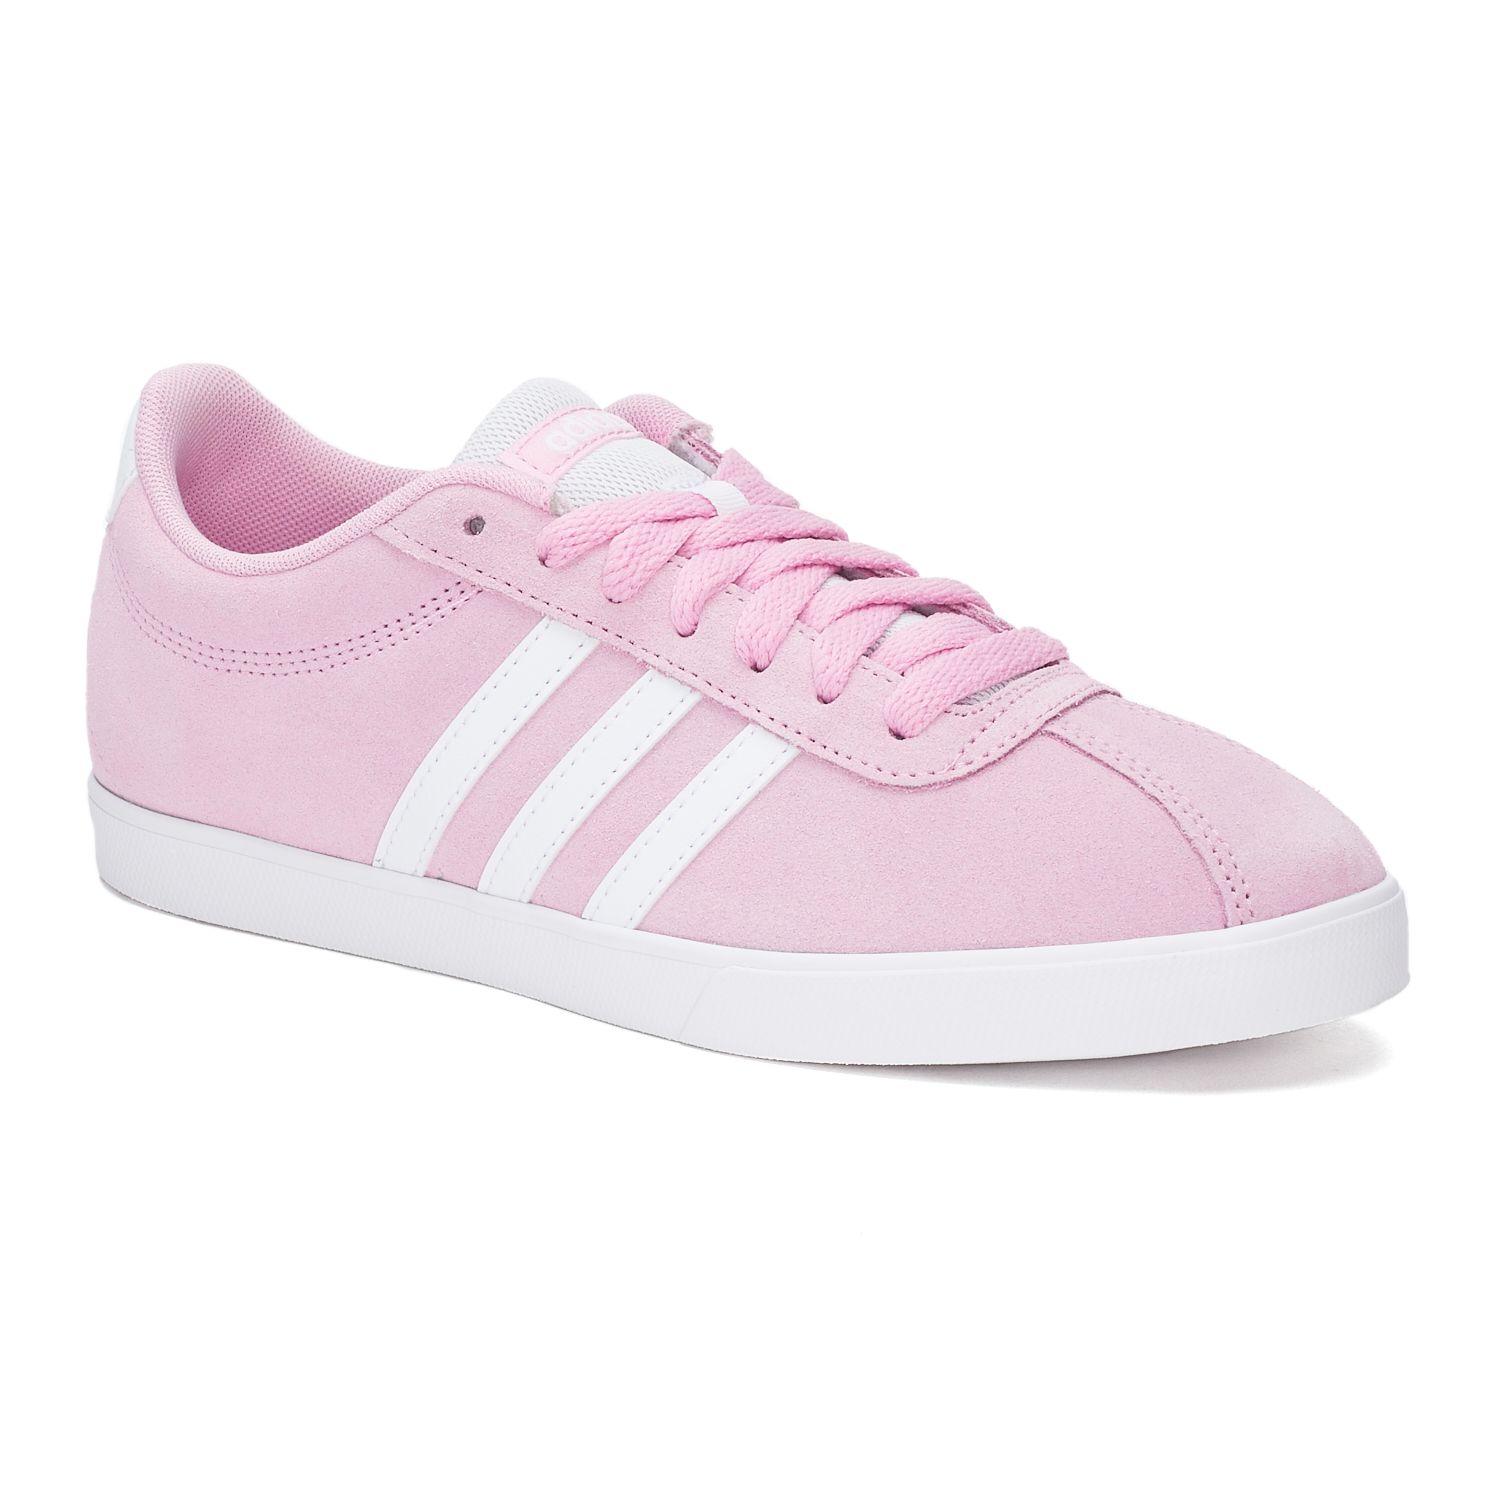 Adidas Courtset Women's Suede Sneakers 